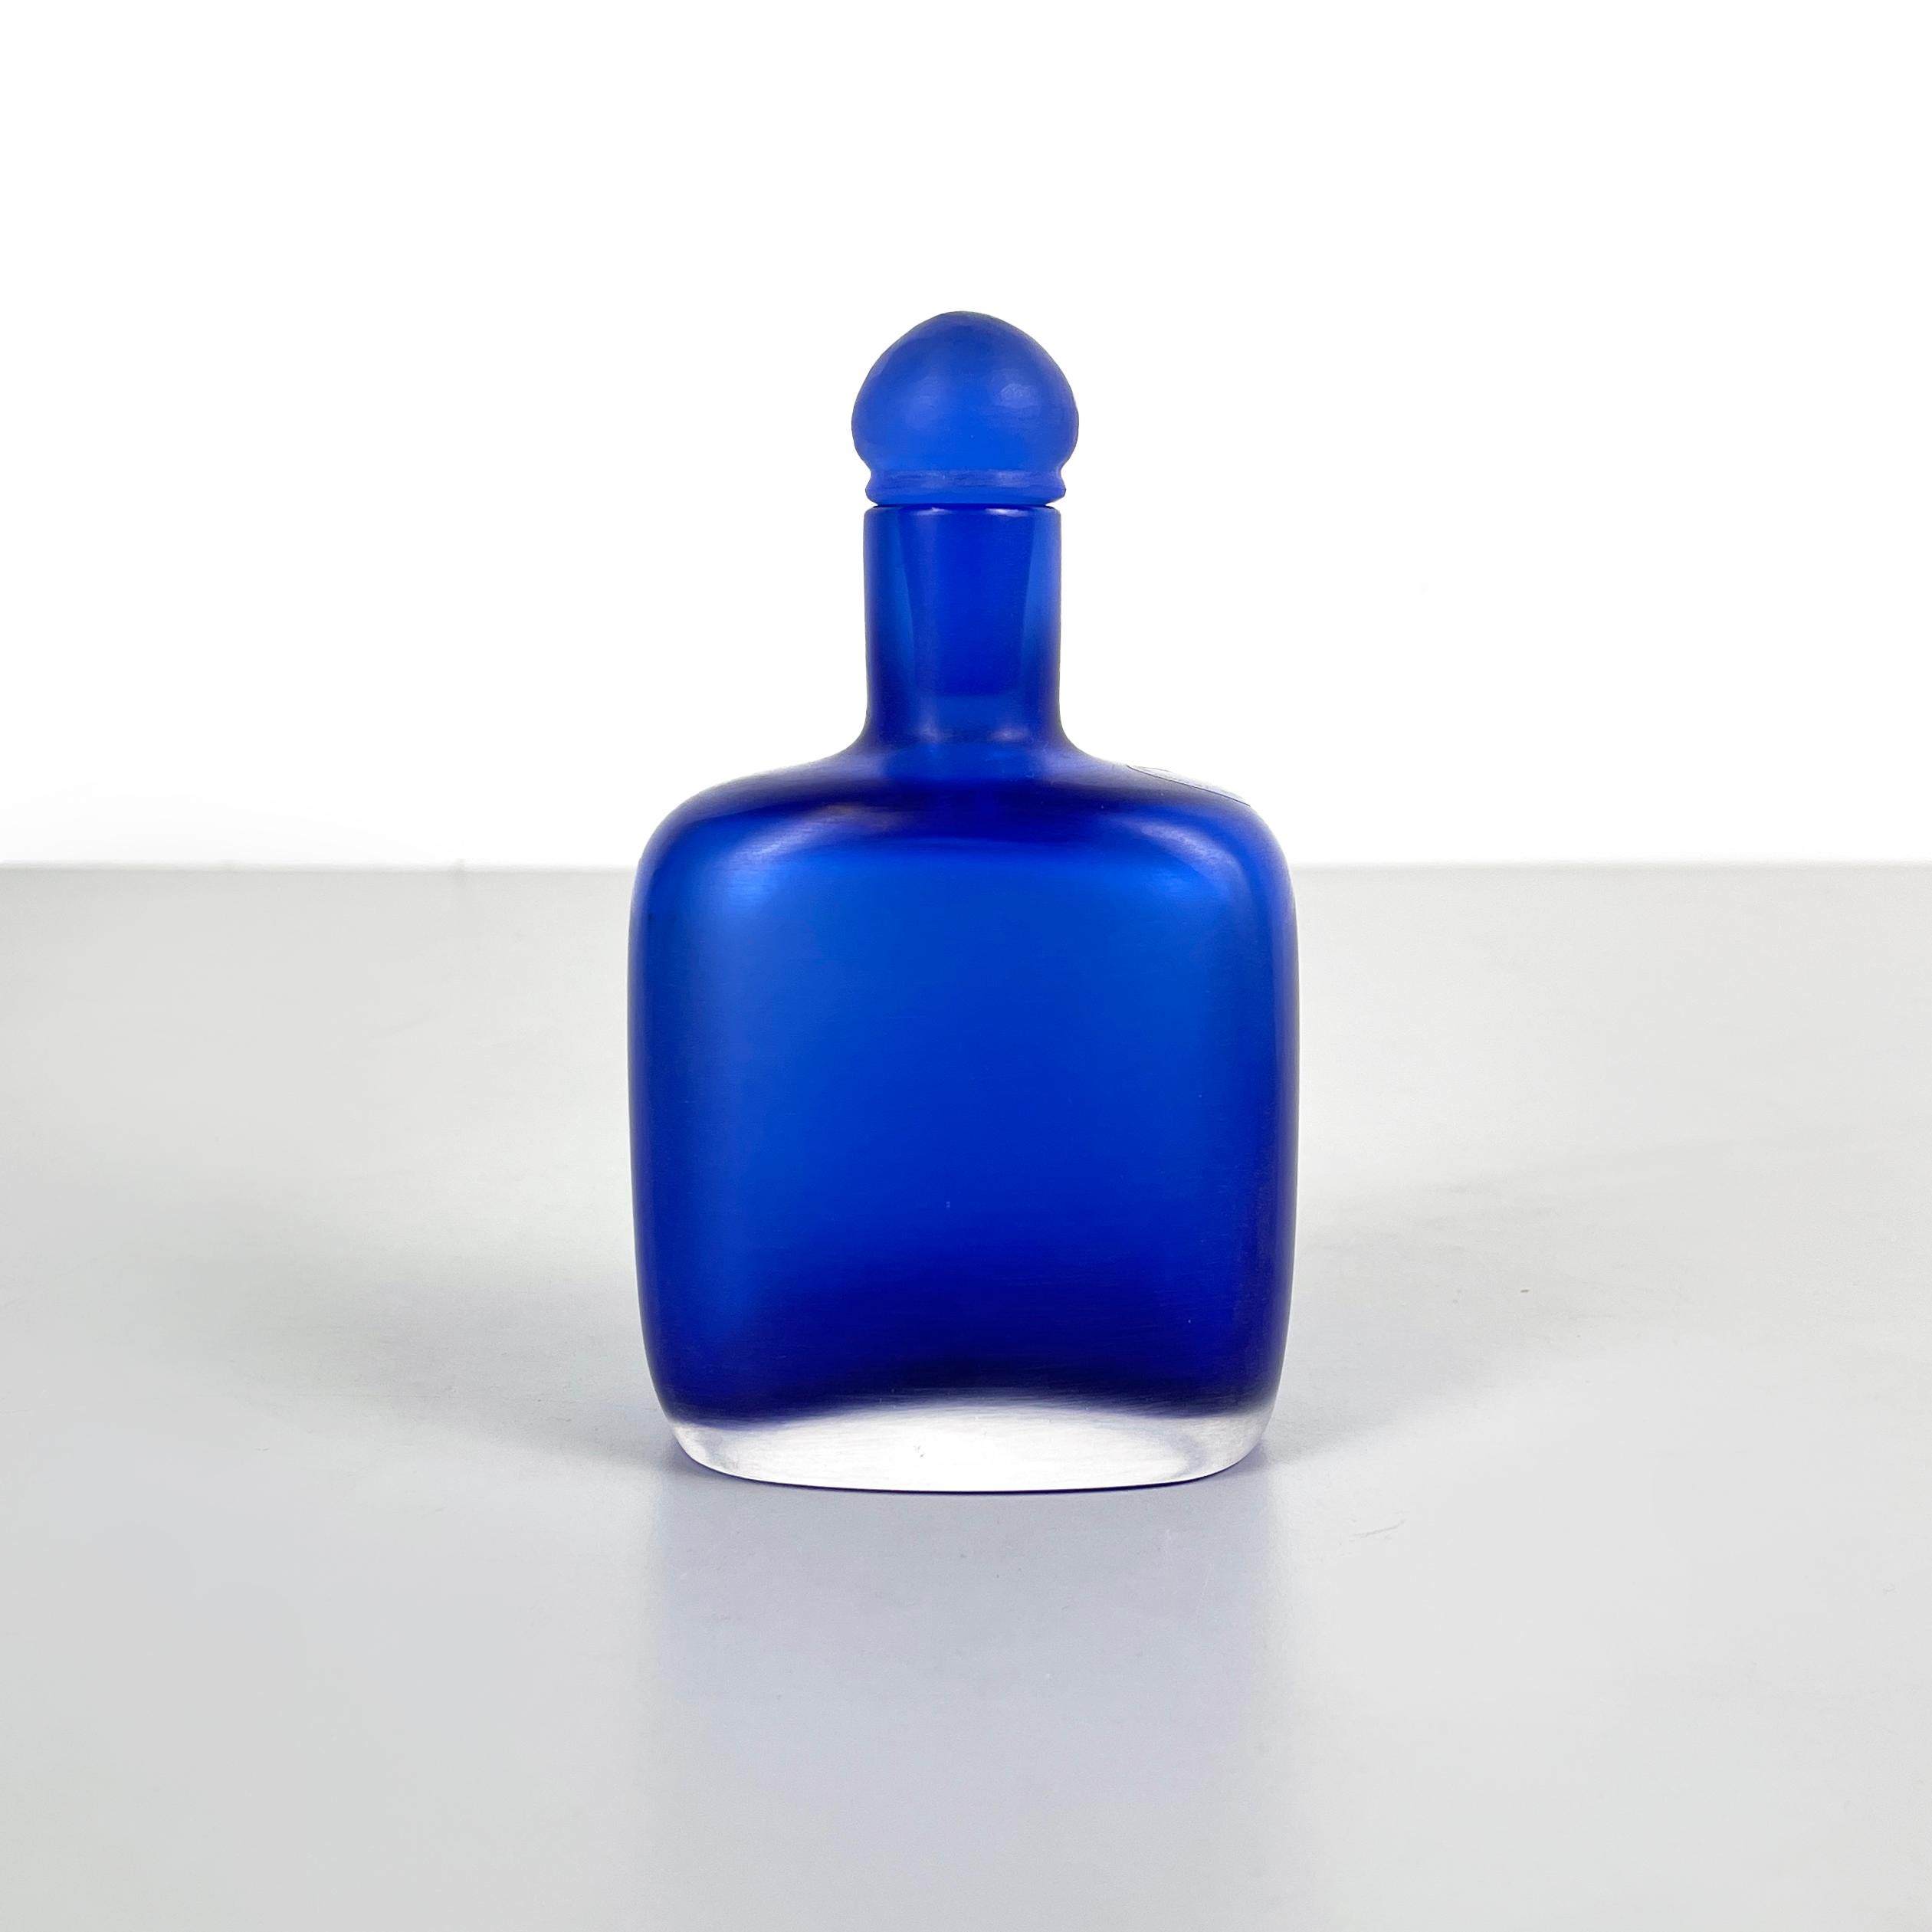 Italian modern Decorative bottle with cap in blue Murano glass by Venini, 1990s
Decorative bottle with a square base and rounded corners, in matt transparent and bright blue Murano glass. The round base cap has a tapered shape.
Produced by Venini in